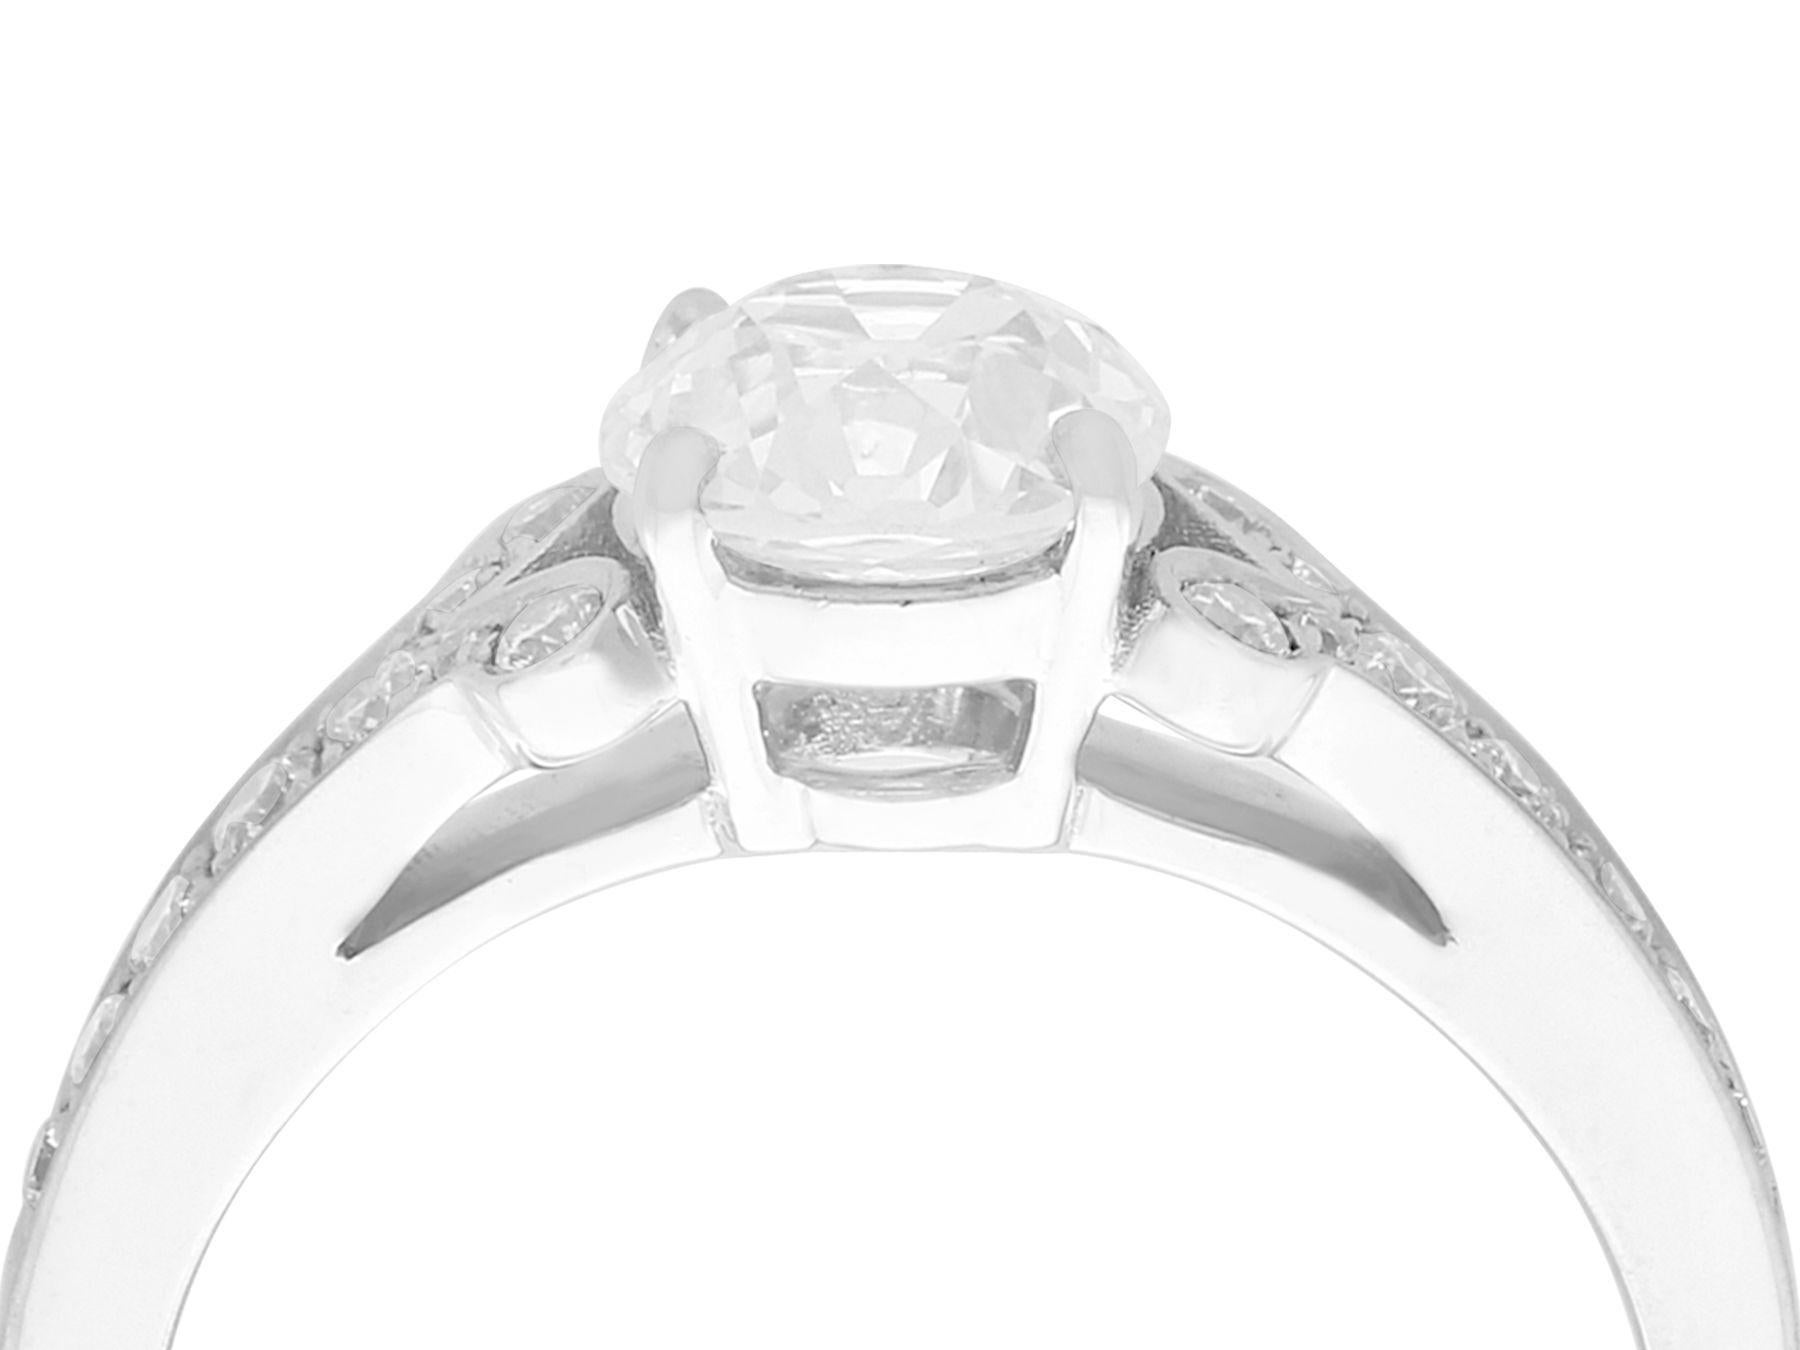 A stunning, fine and impressive antique 1.42 carat diamond (total) and contemporary 18k white gold ring; part of our diverse diamond jewelry and estate jewelry collections.

his stunning diamond solitaire ring has been crafted in 18k white